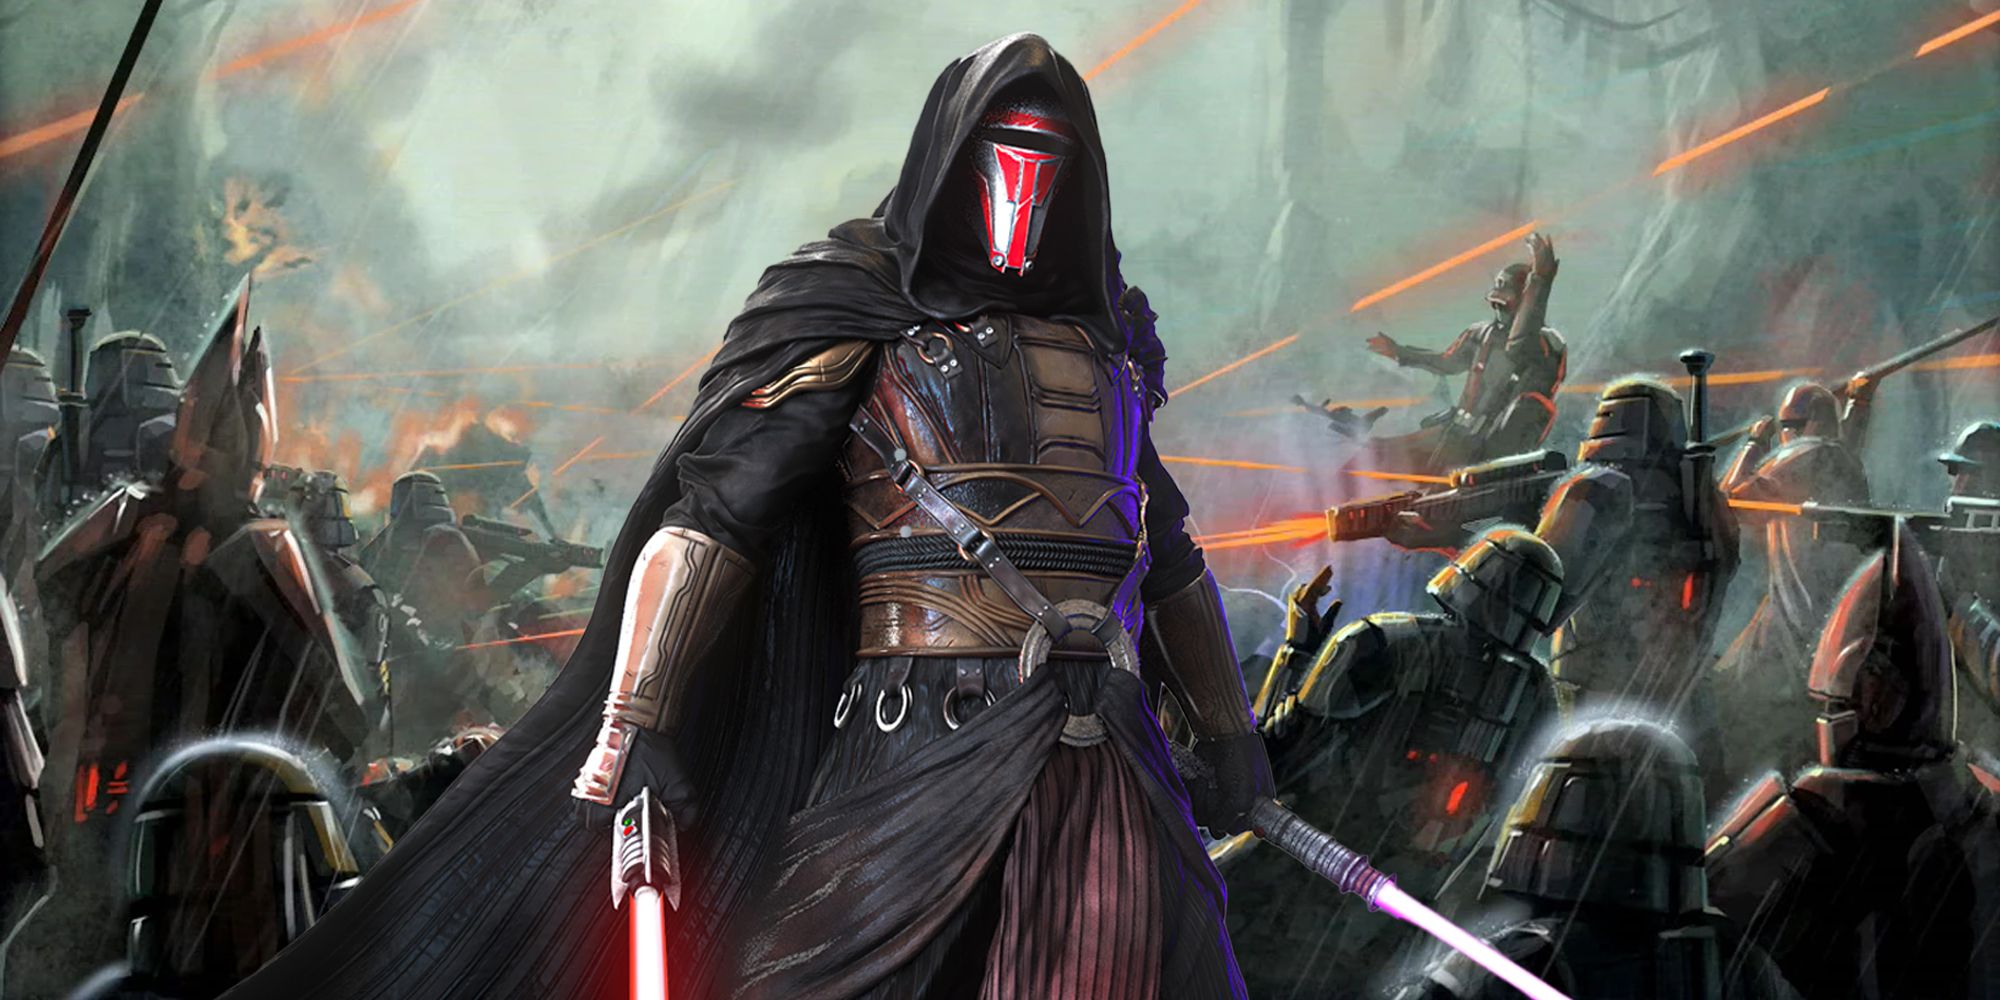 Darth Revan from the KOTOR games with the Battle of Bothawui behind him